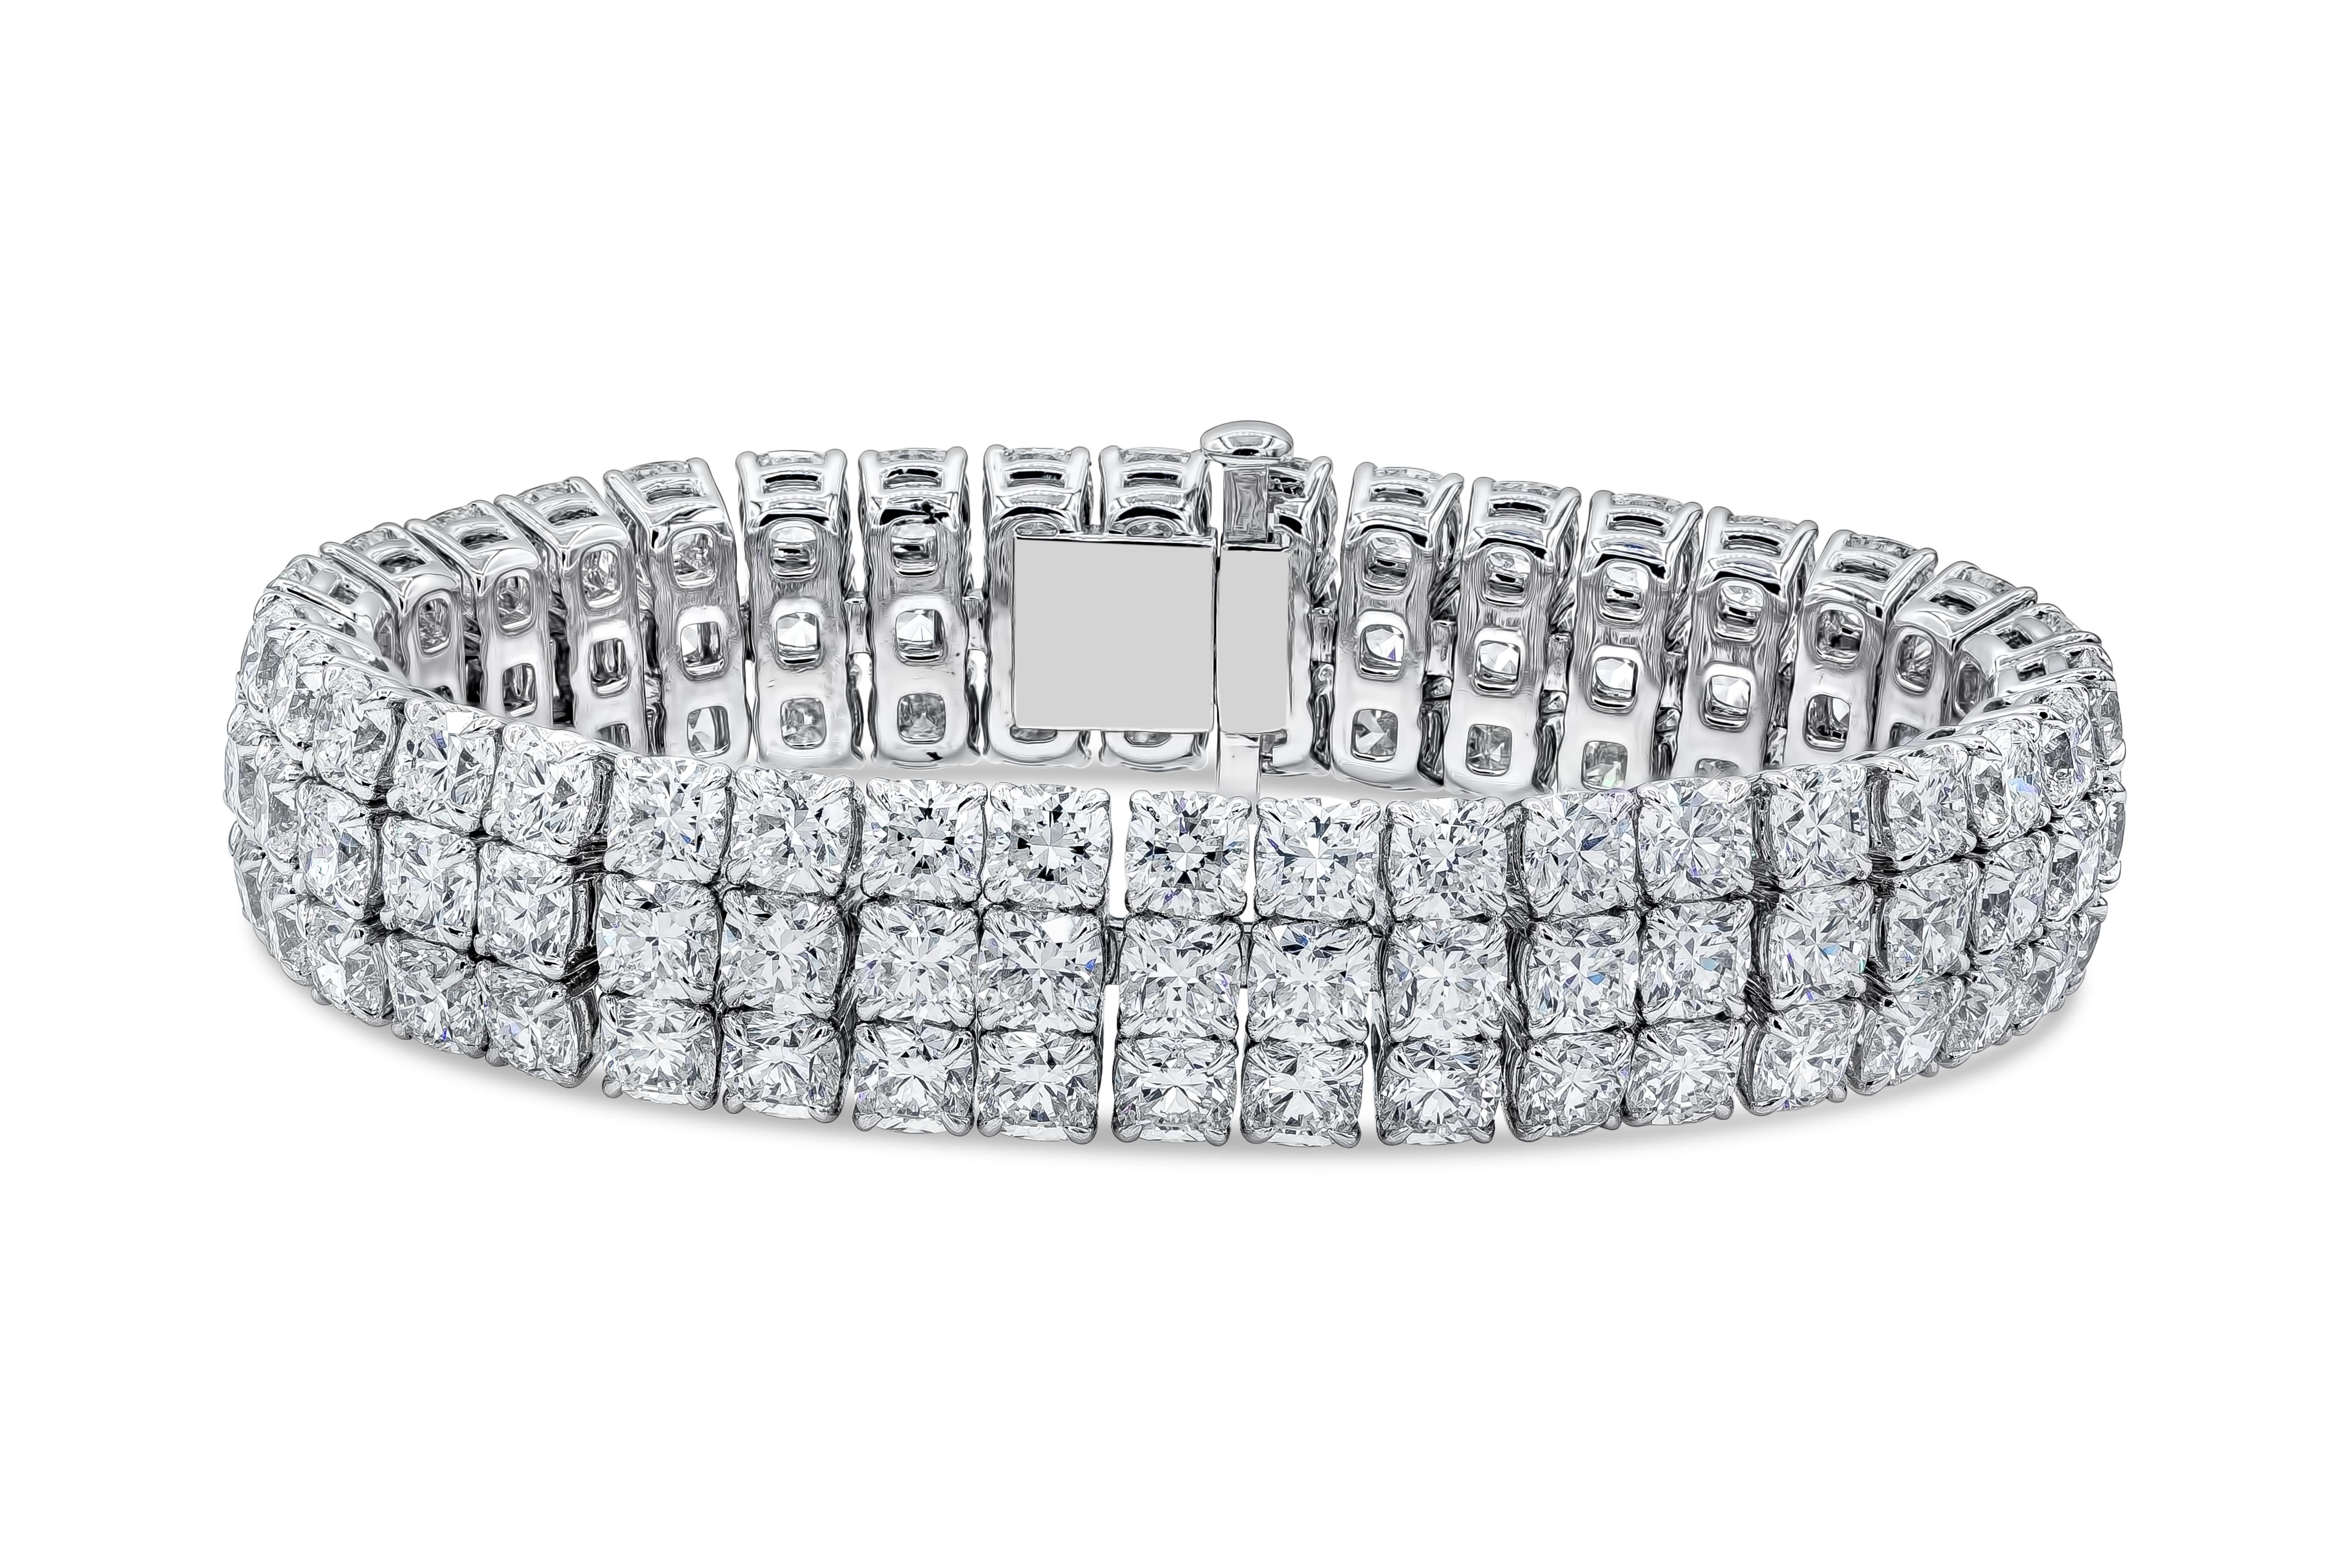 This elegant and luxurious tennis bracelet featuring 108 stones of brilliant cushion cut diamonds weighing an astounding 44.30 carats total, F+ color and VS+ in clarity. All stones are very white and perfectly matched. Set in a three-row 18k white